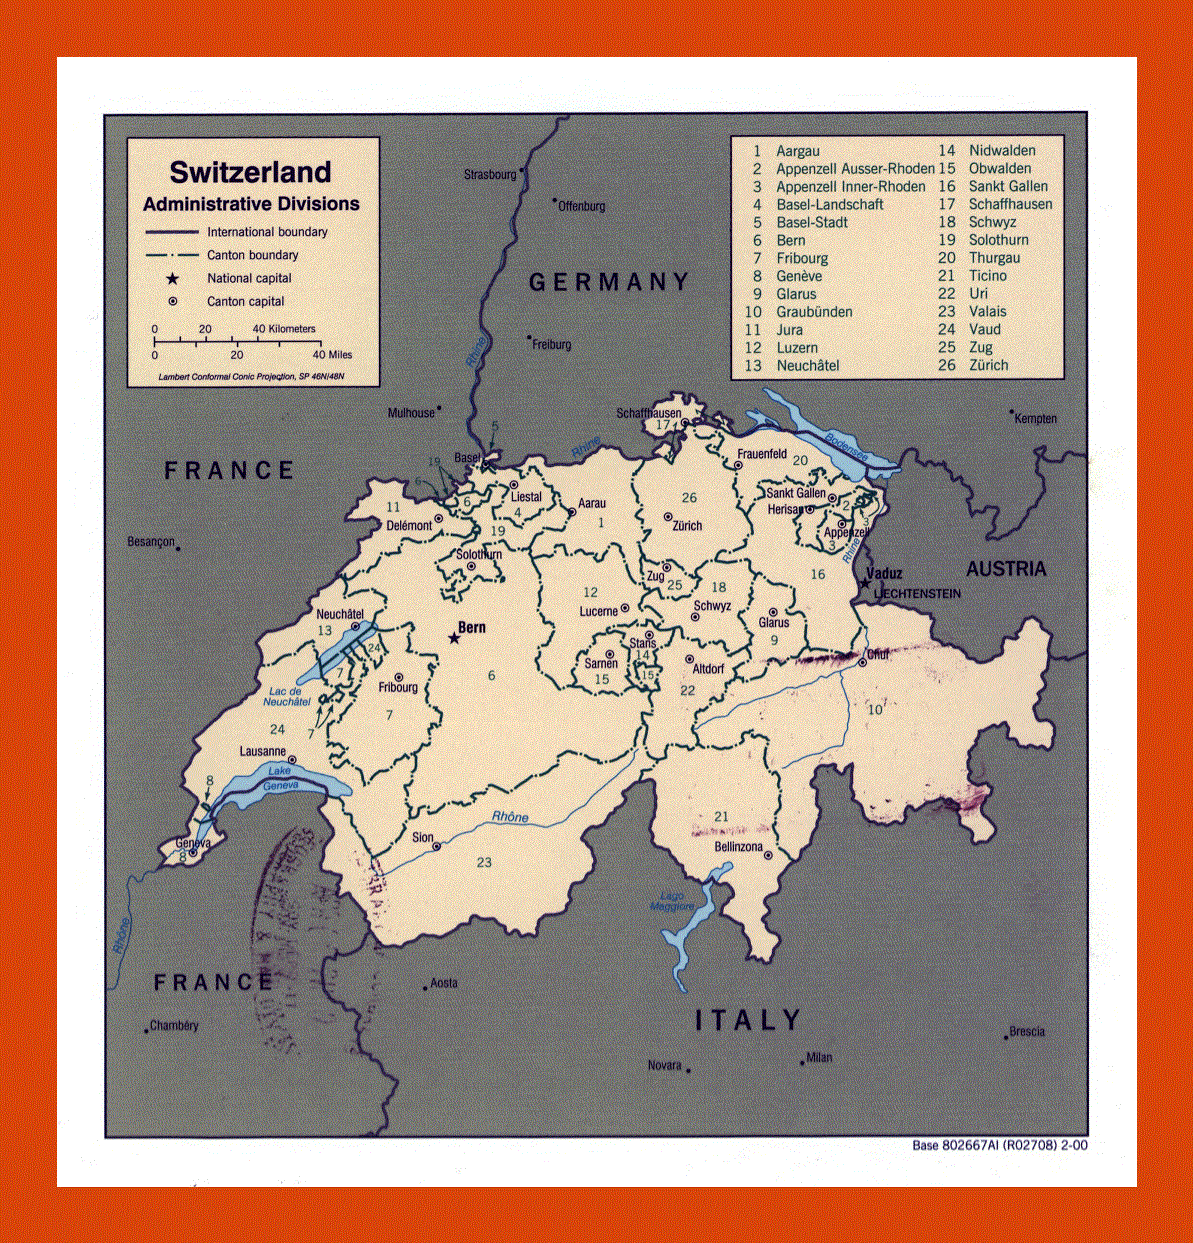 Administrative divisions map of Switzerland - 2000